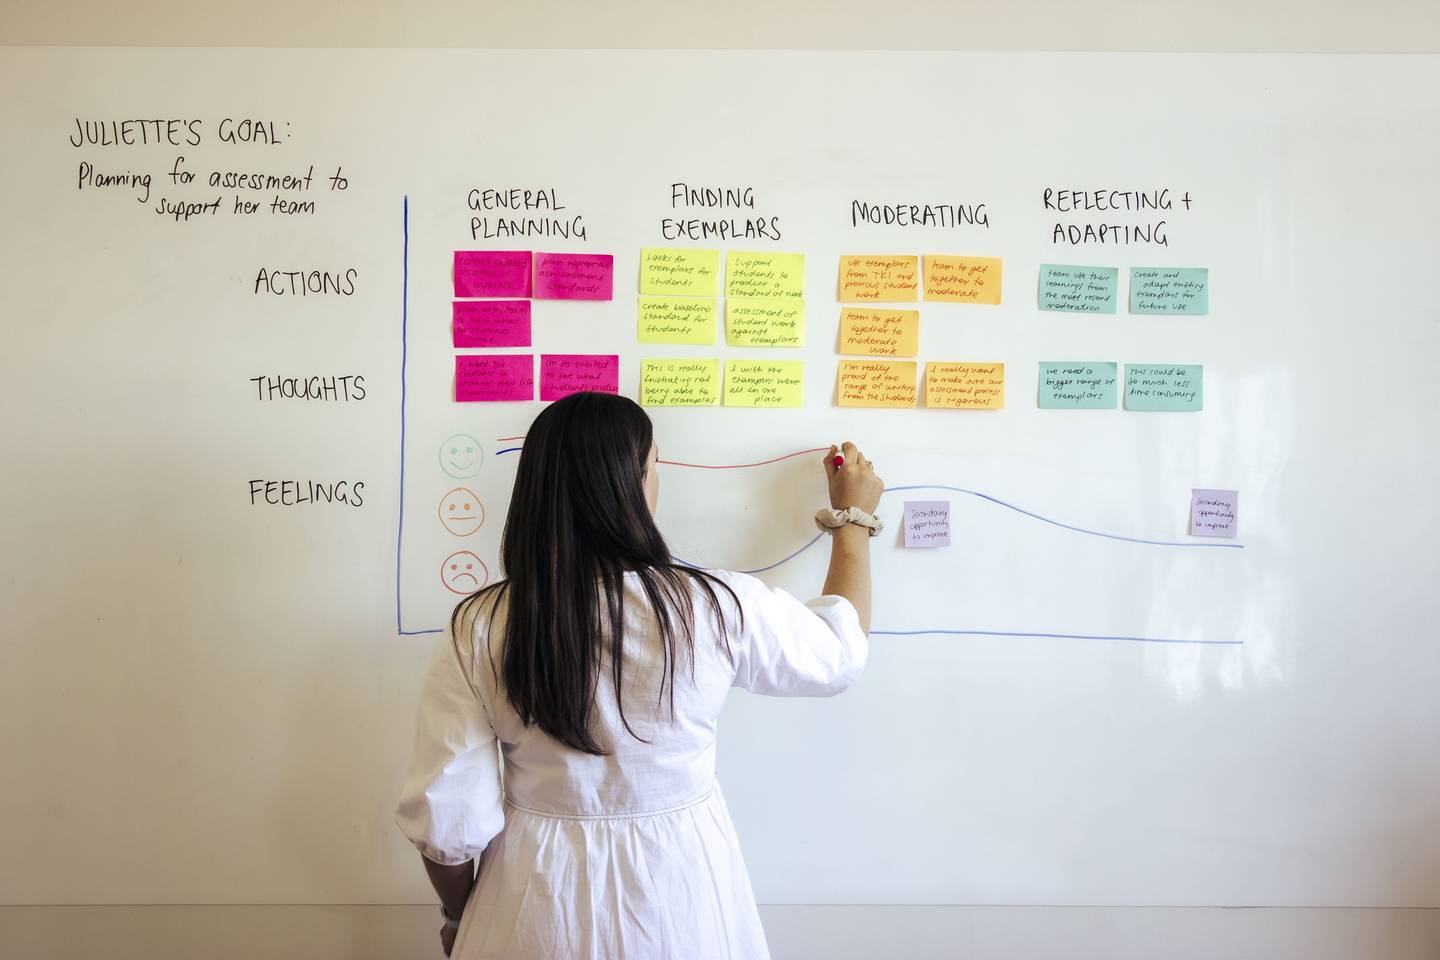 A woman planning customer journey mapping on a whiteboard.